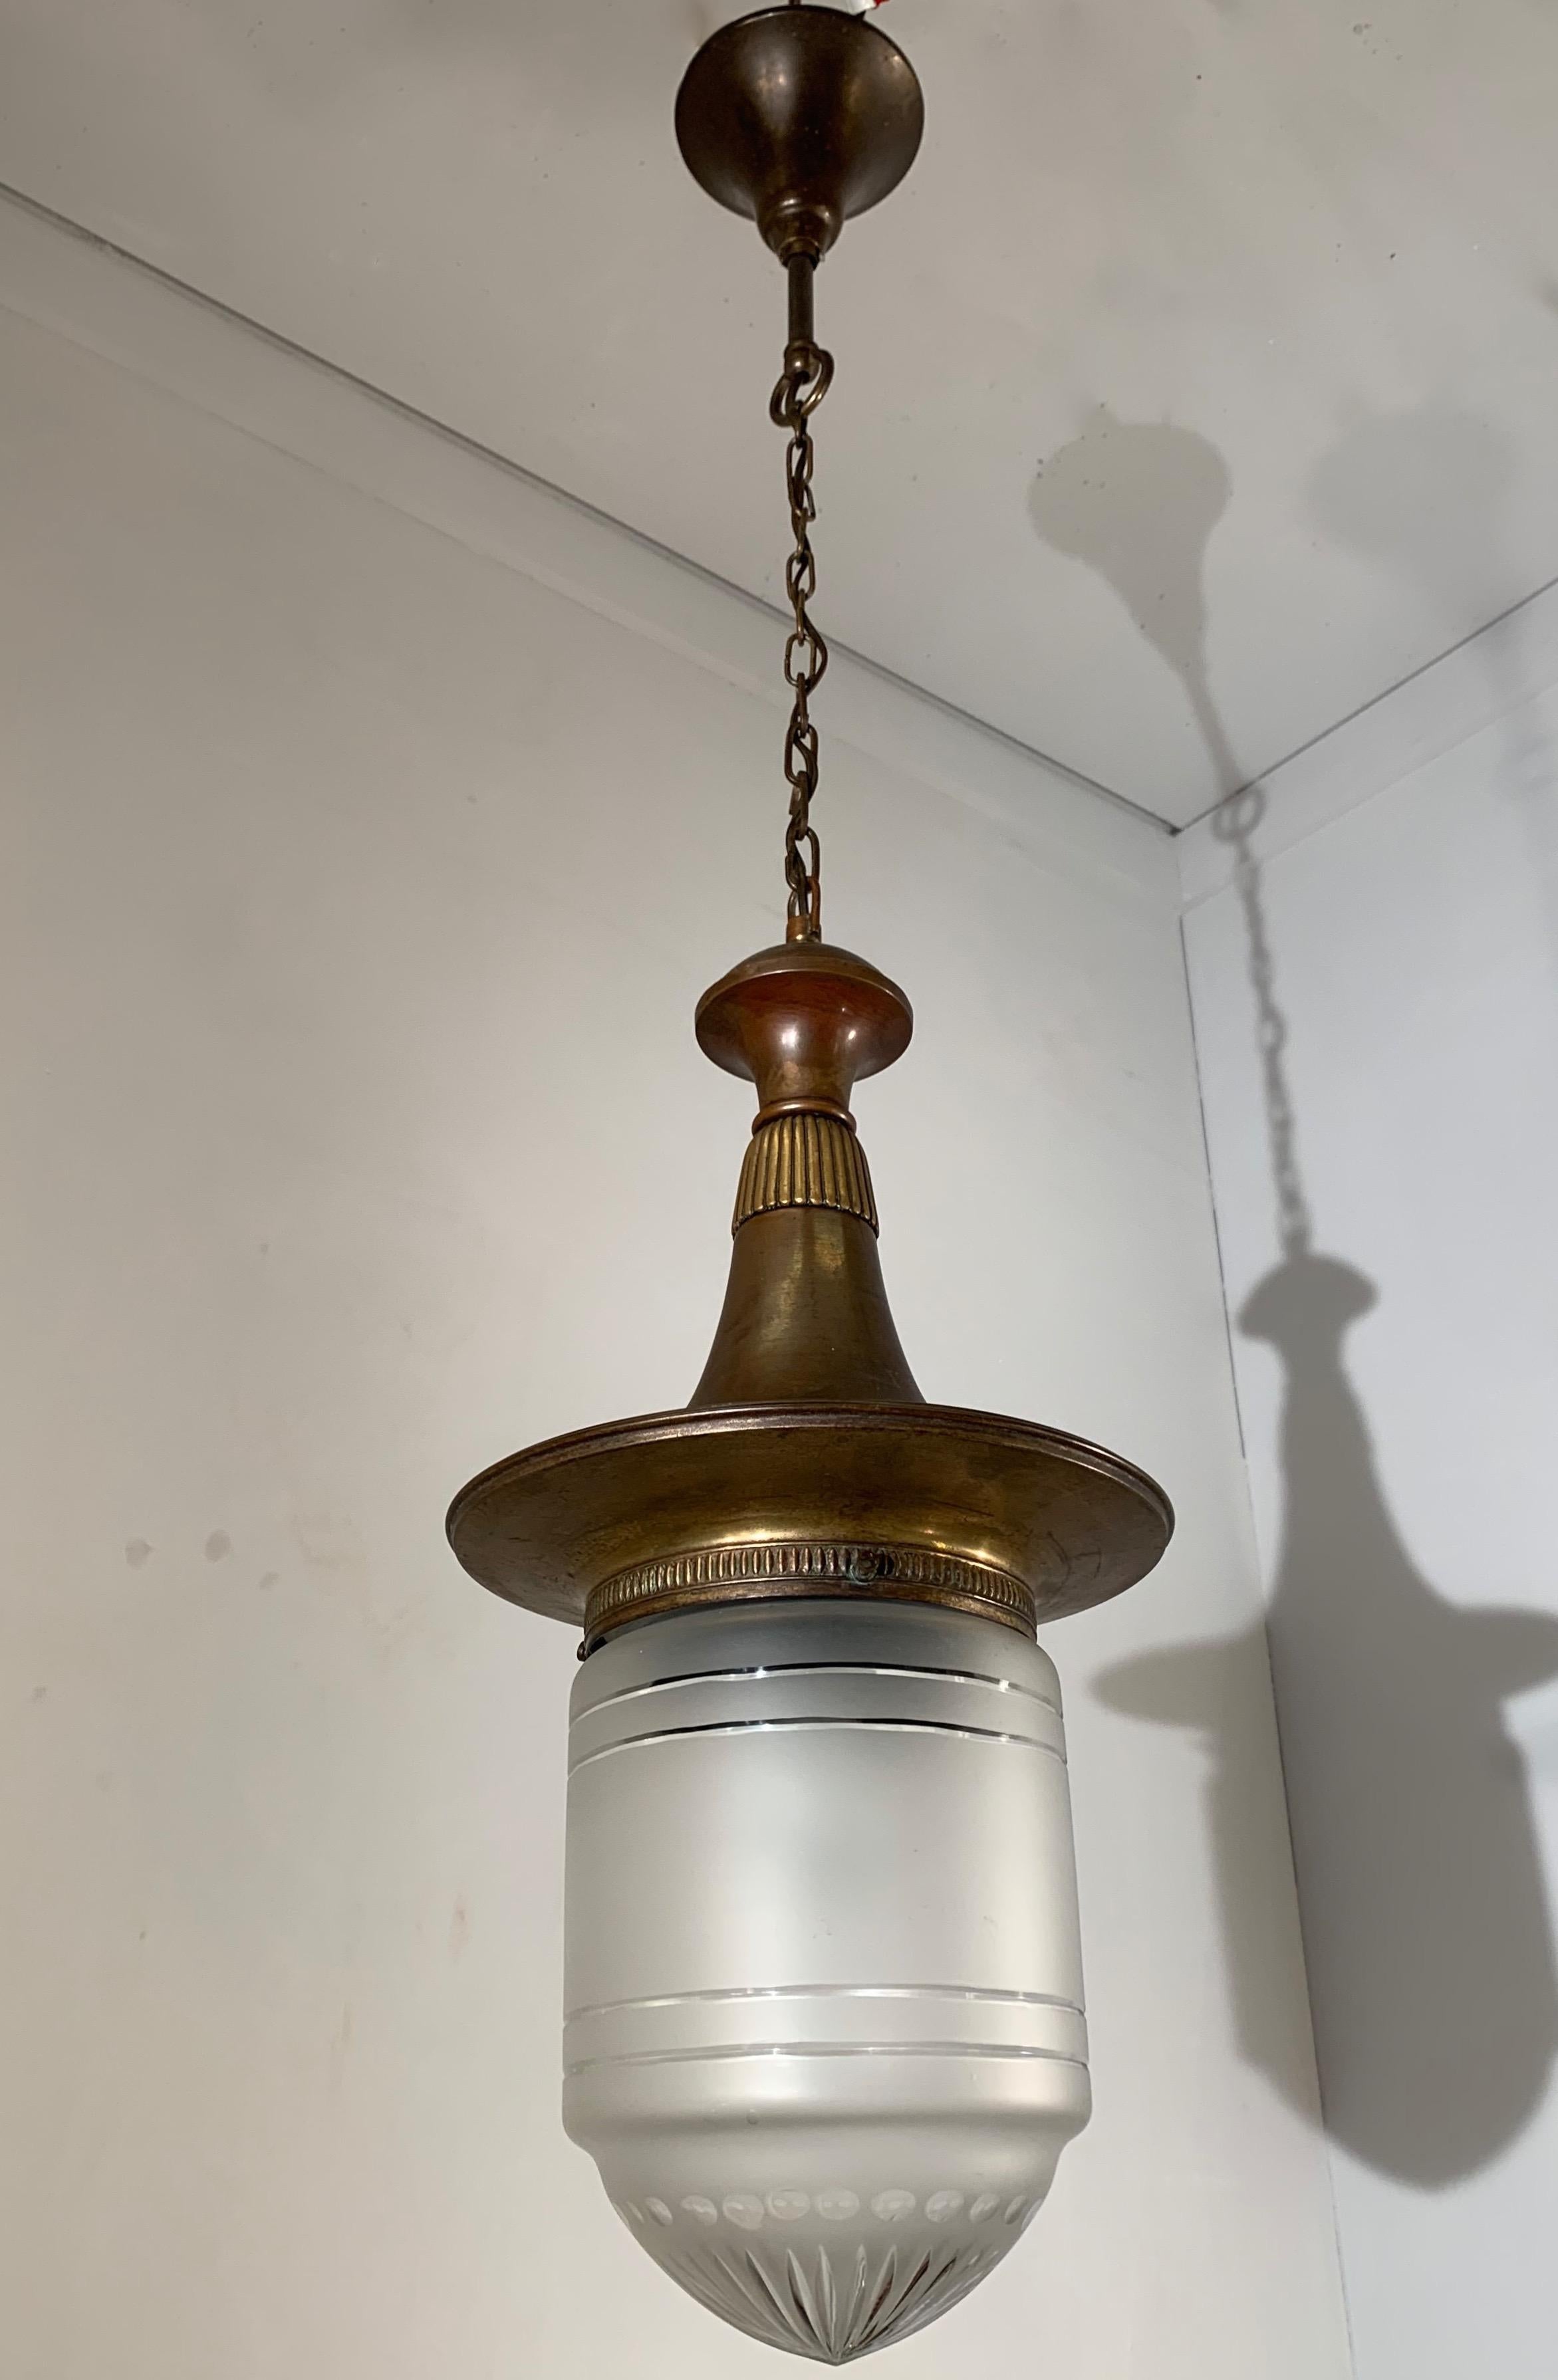 Good size handcrafted light fixture.

If you have an Arts & Crafts house or if you are a collector of this sophisticated, early 20th century style then this unique pendant could be gracing your living space soon. With the Arts and Crafts era being